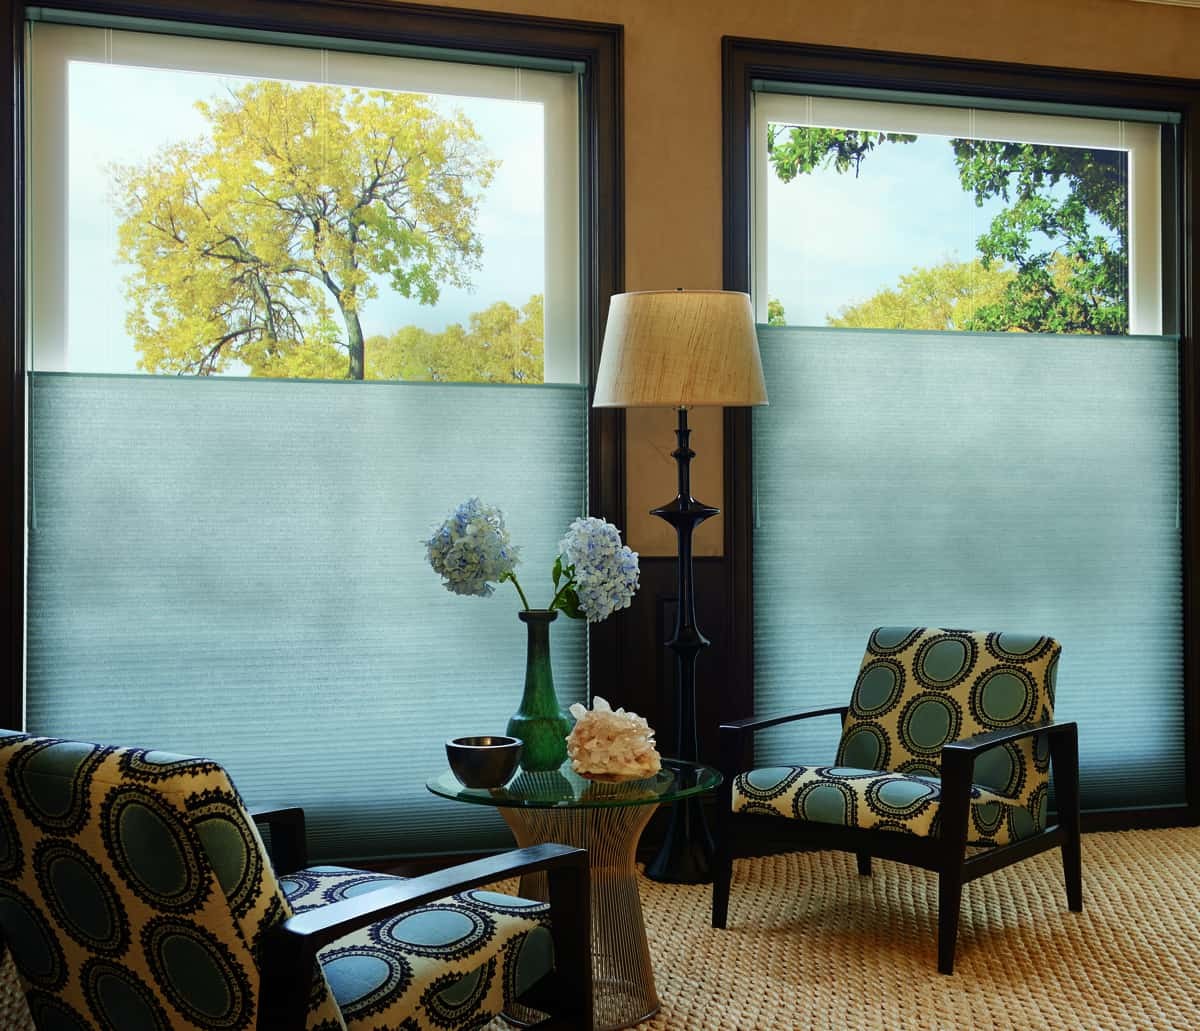 Motorized Duette Honeycomb Shades near Seattle, Washington (WA) and other motorized window coverings for homes.